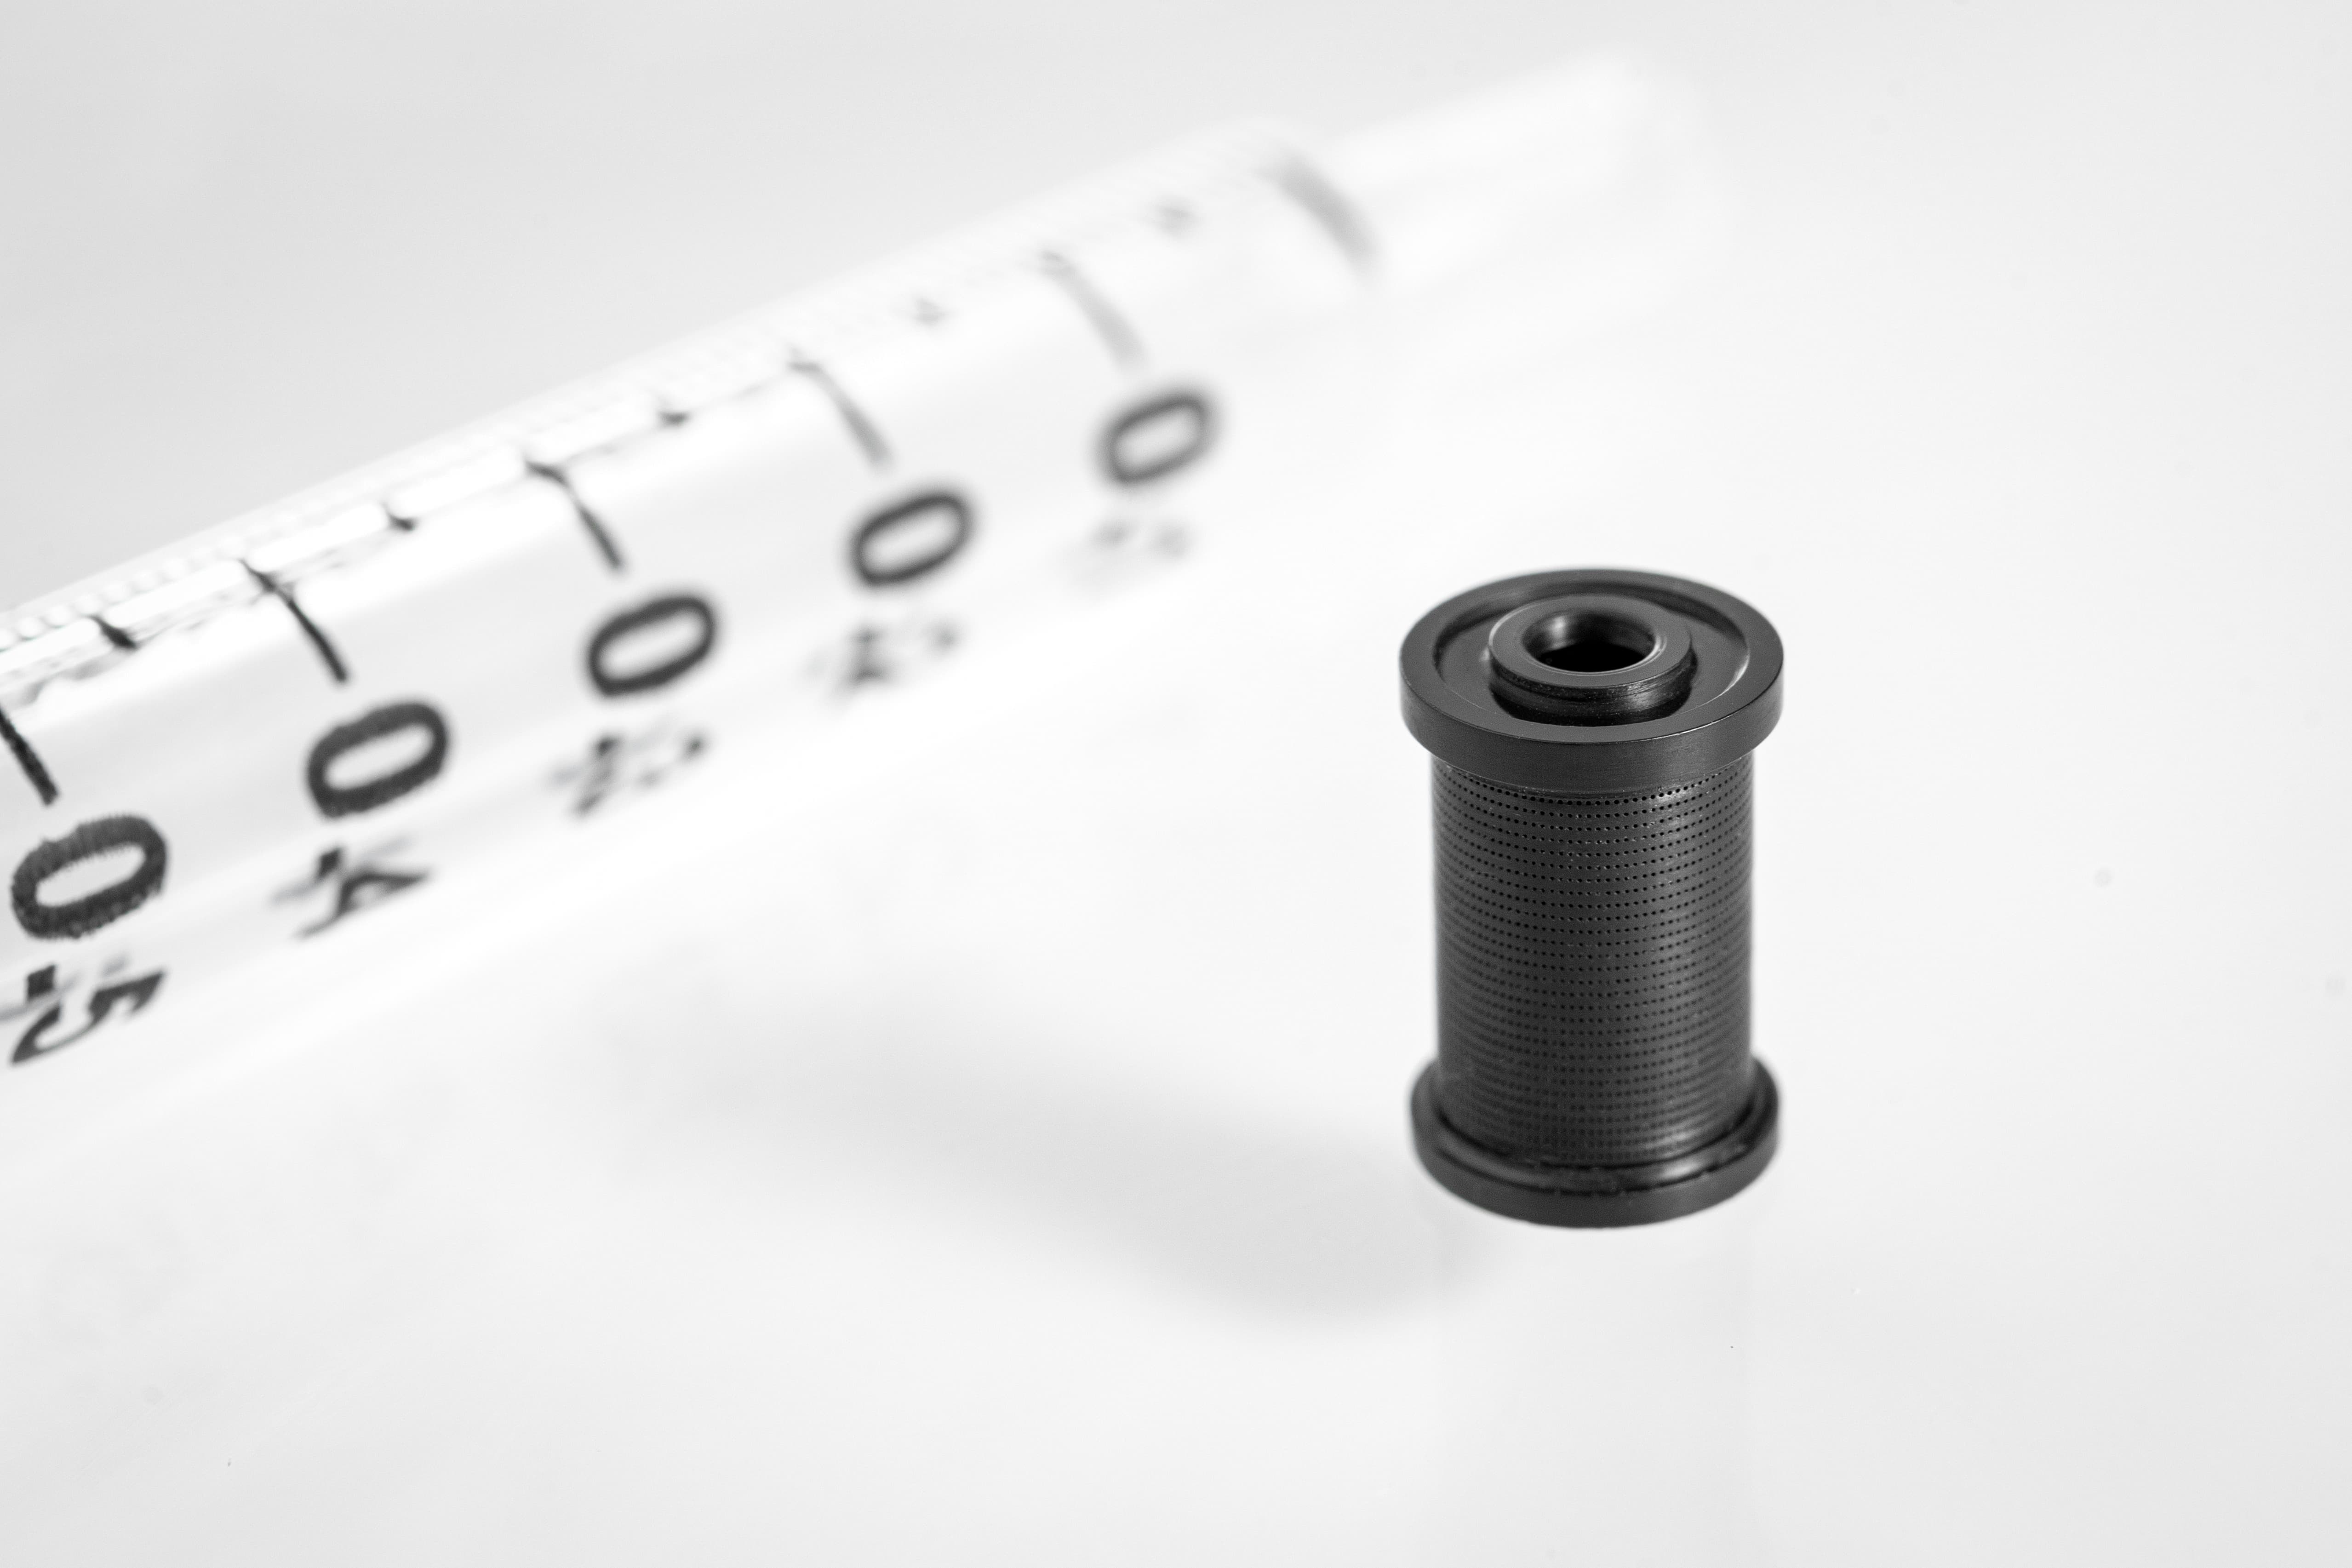 Example of a microscale medical device part